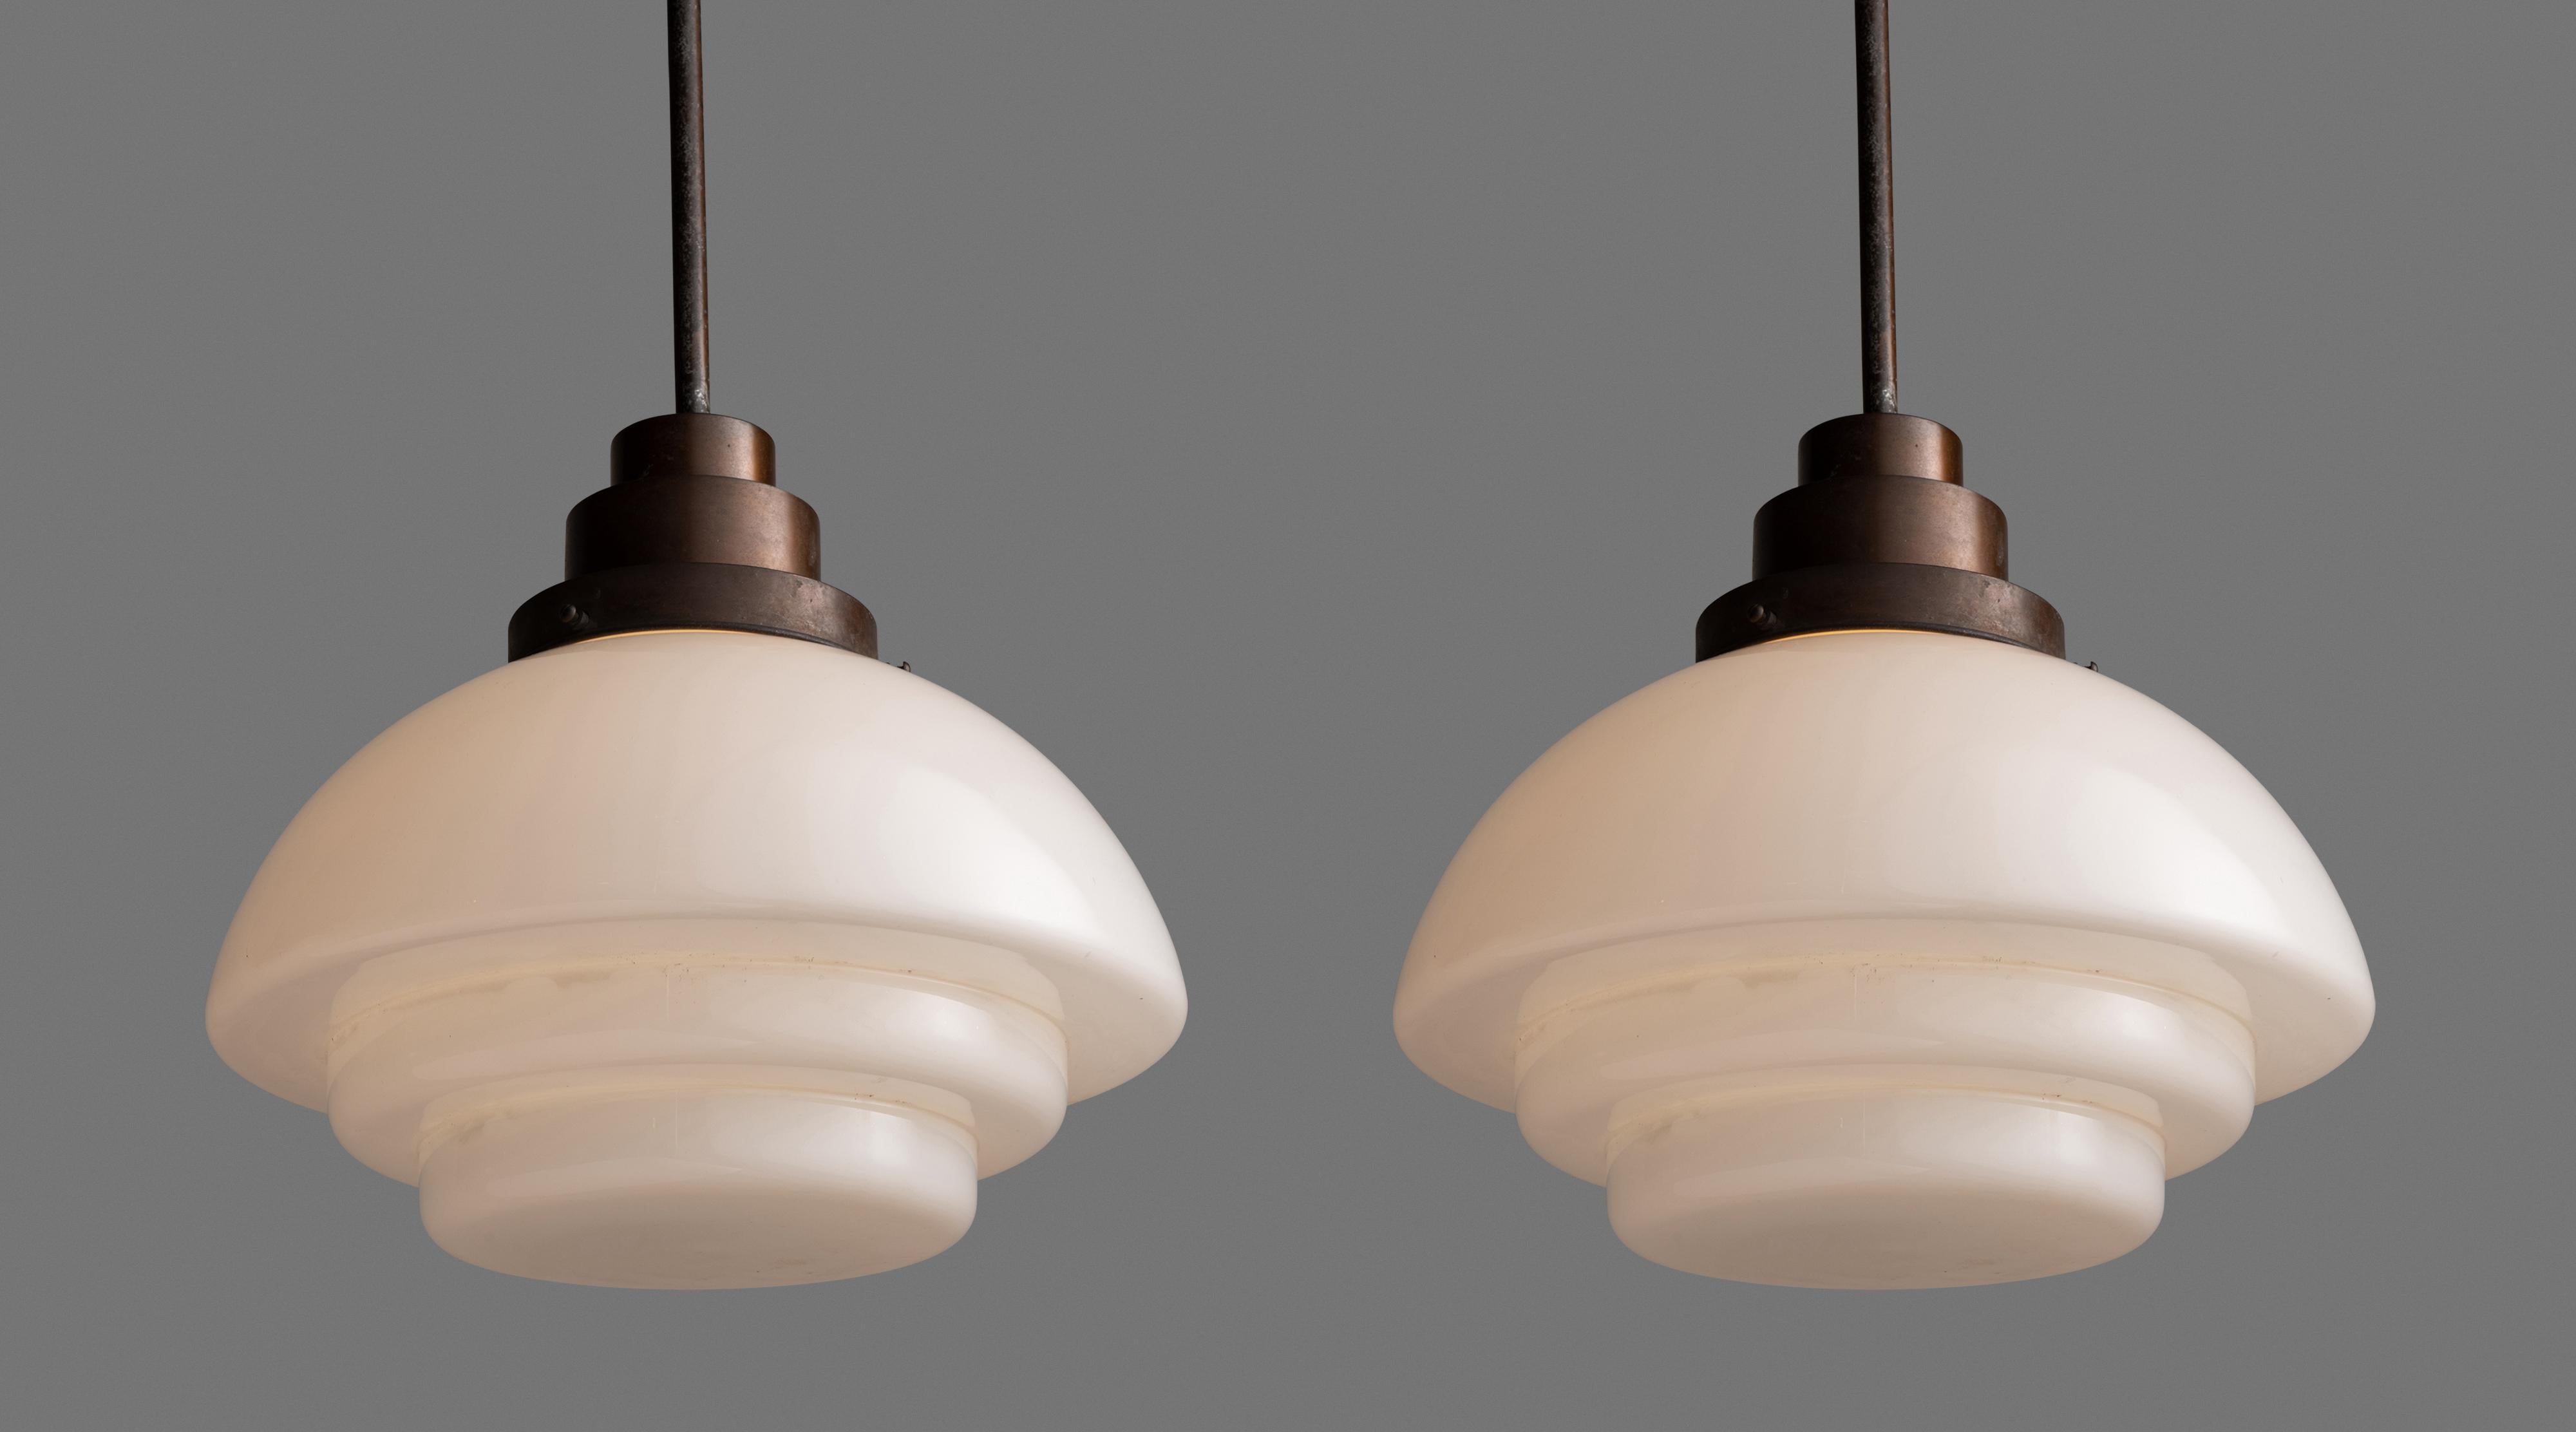 Opaque deco ceiling lights.

England circa 1930

Tiered opaline glass shades with copper fitter and rod.

*Please note the price is per unit, and the lights are sold individually*